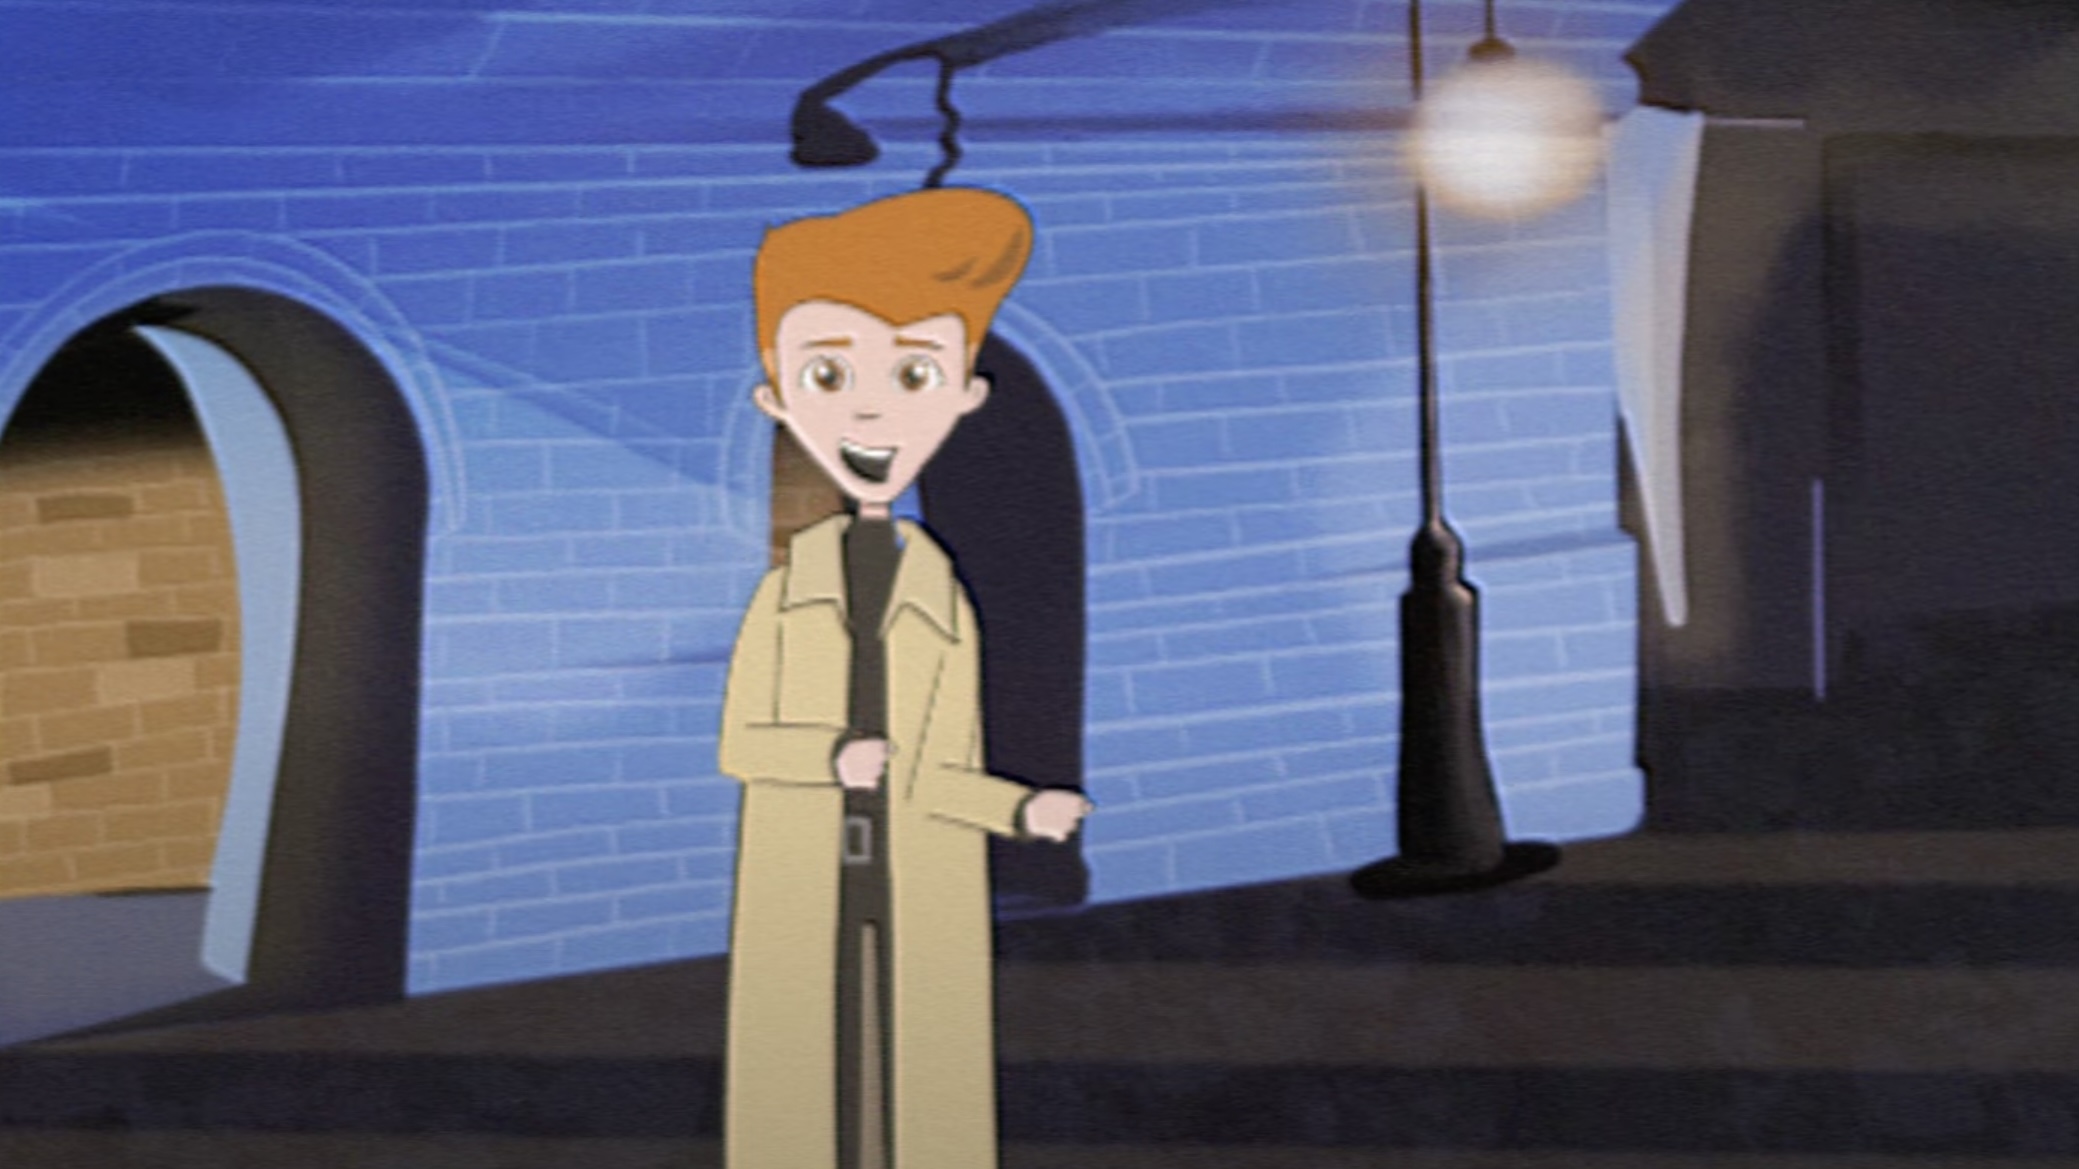 Rick Astley unveils animated video for classic hit 'Never Gonna Give You Up'  - RETROPOP - Fashionably Nostalgic | News, Interviews, Reviews, and more...